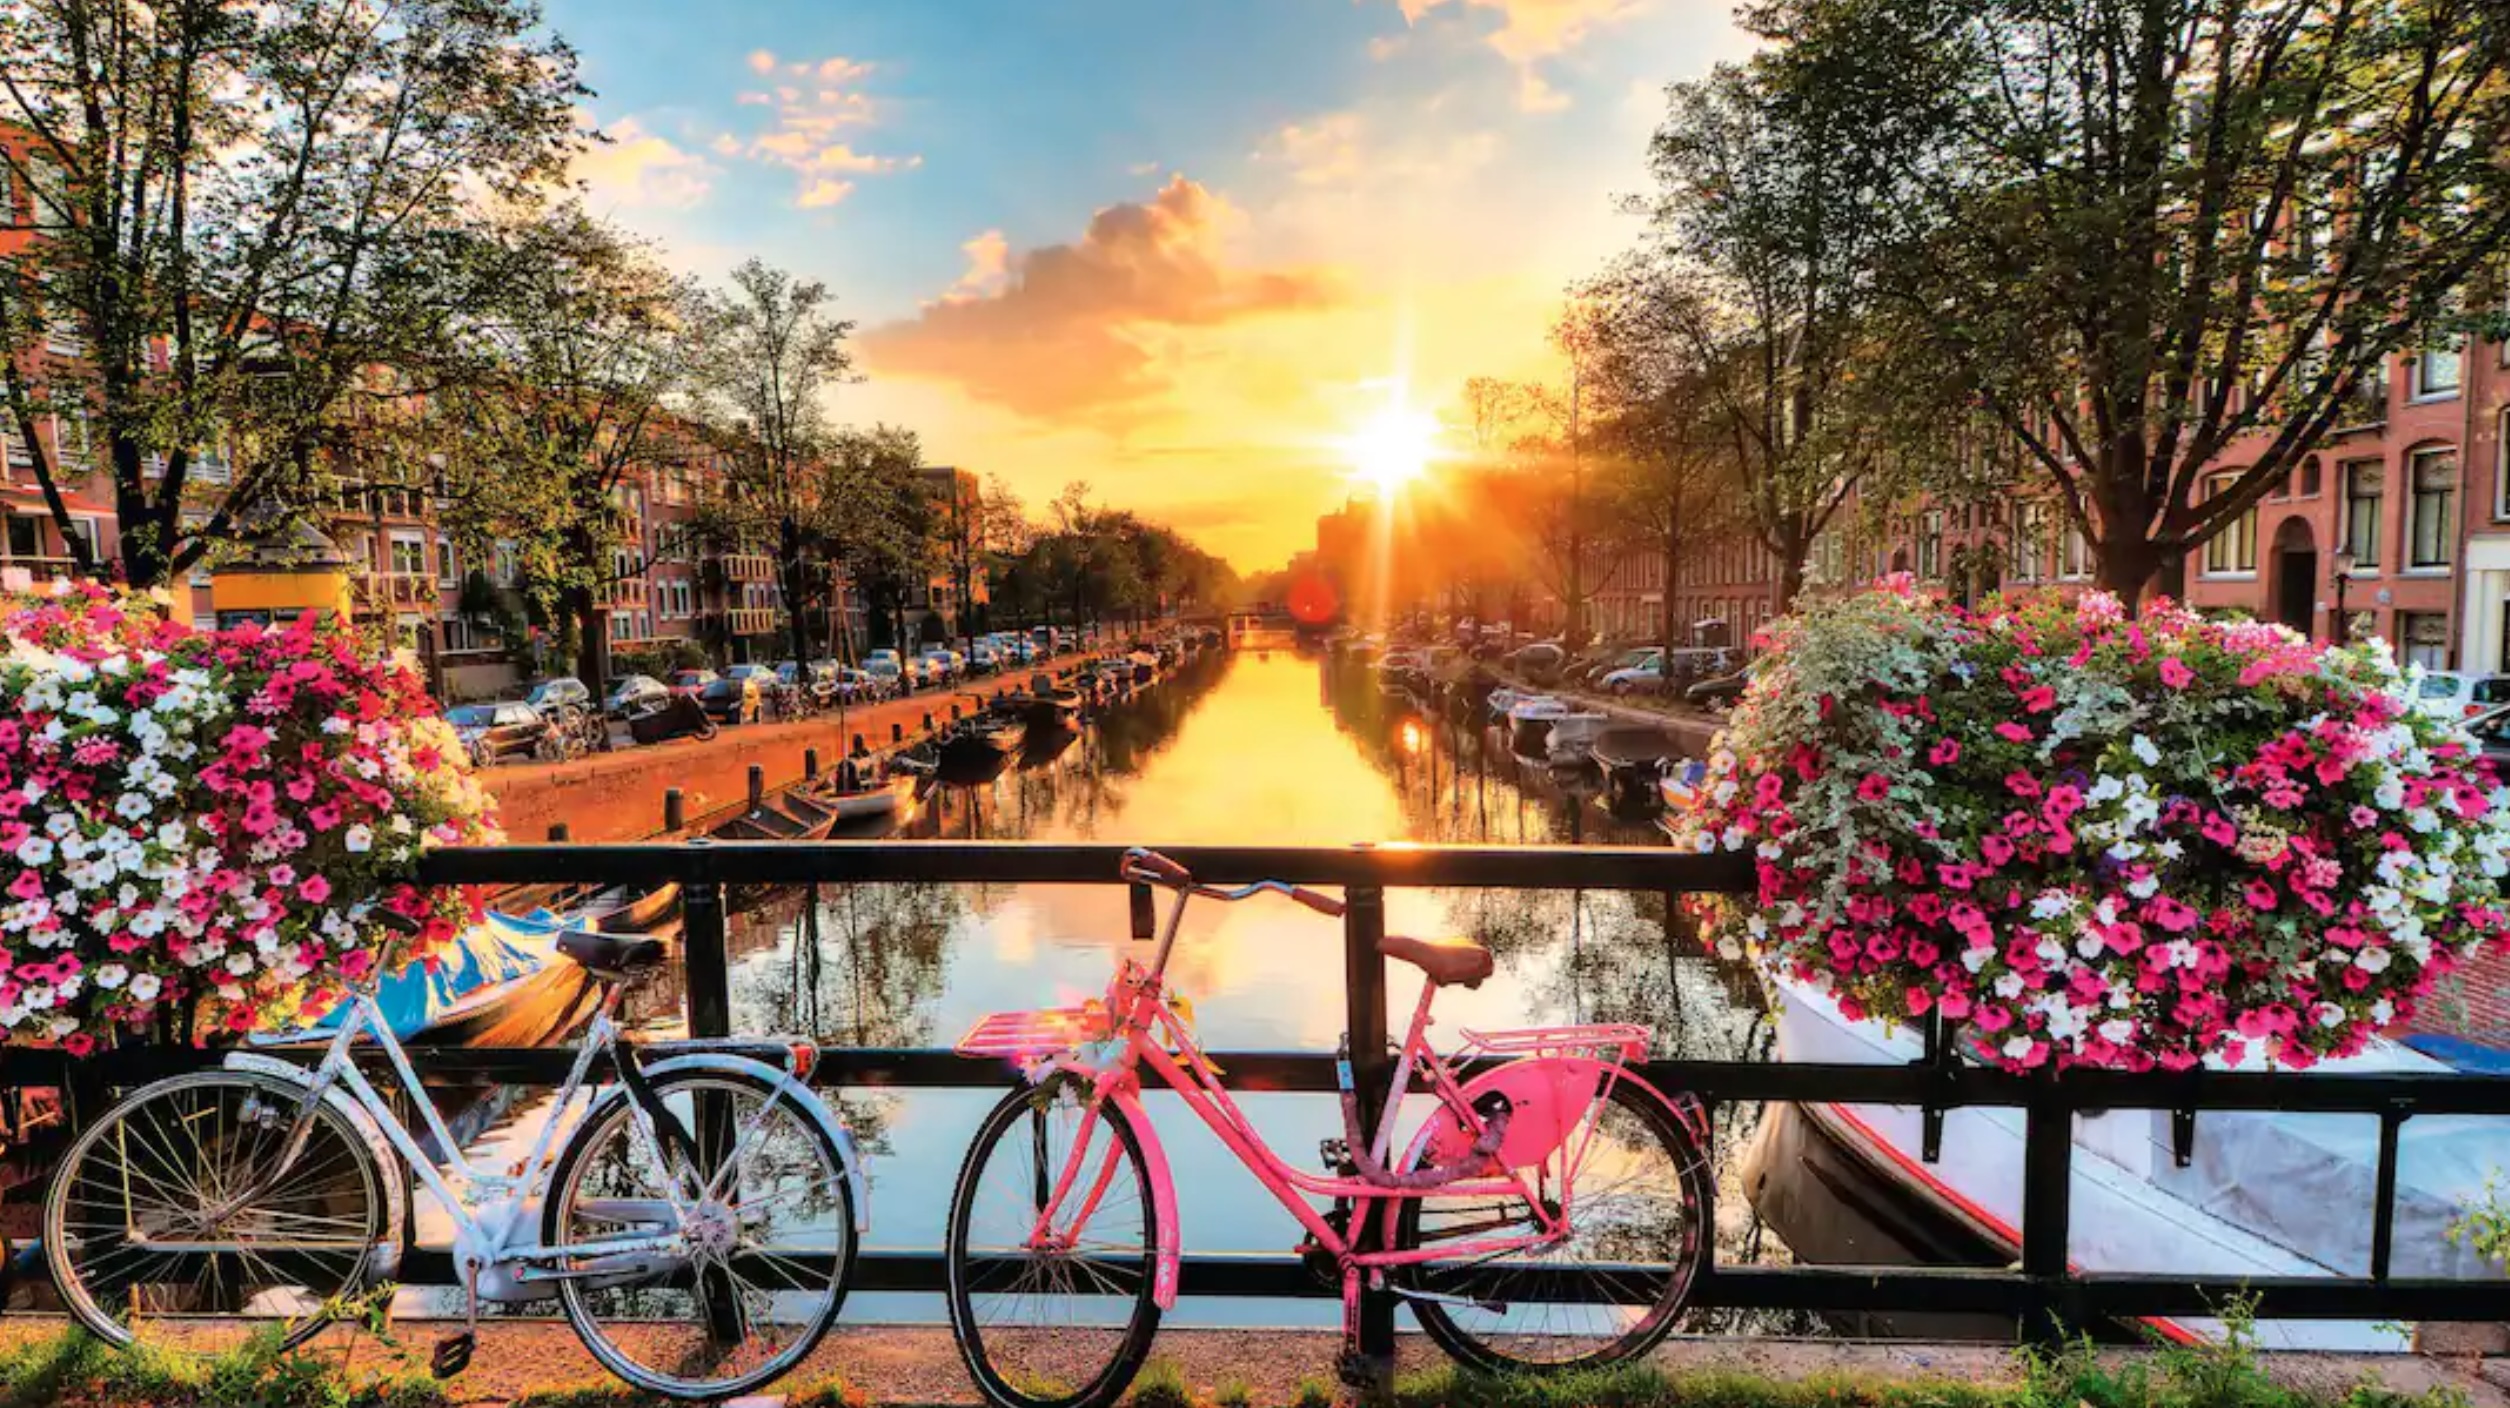 sun setting over Amsterdam with cycles on a bridge over the canal in foreground